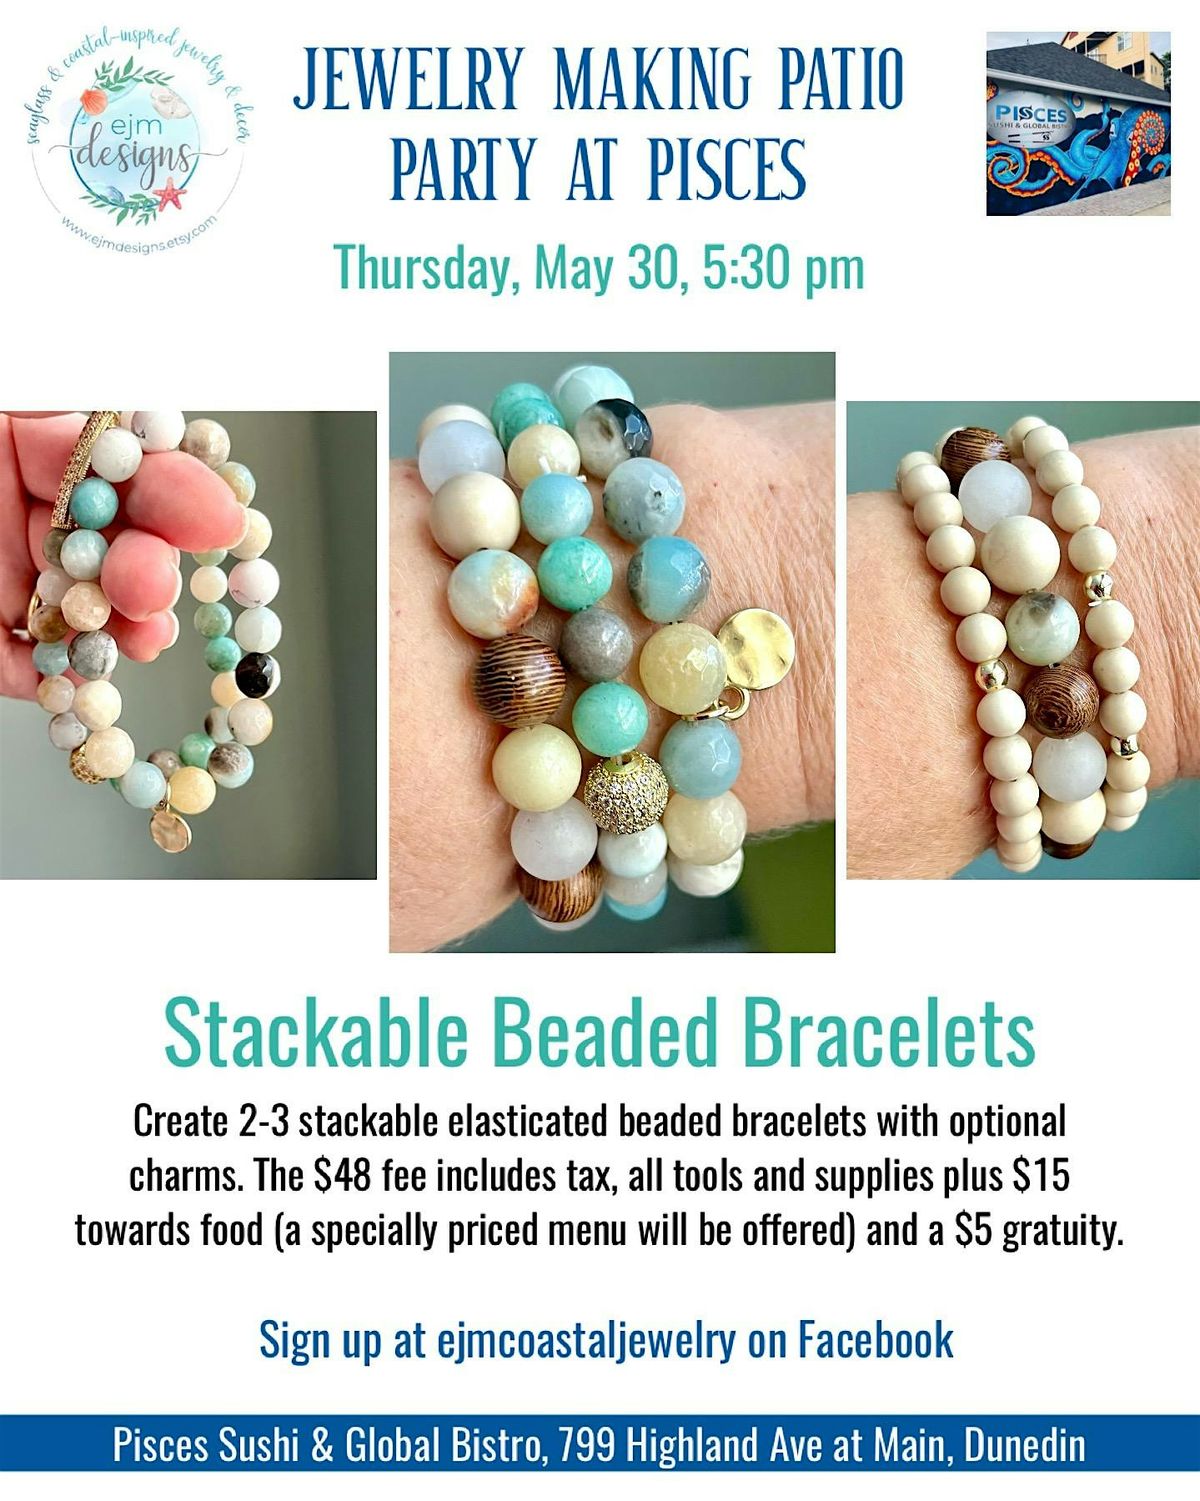 Jewelry Making Patio Party at Pisces: stackable bracelets in coastal colors